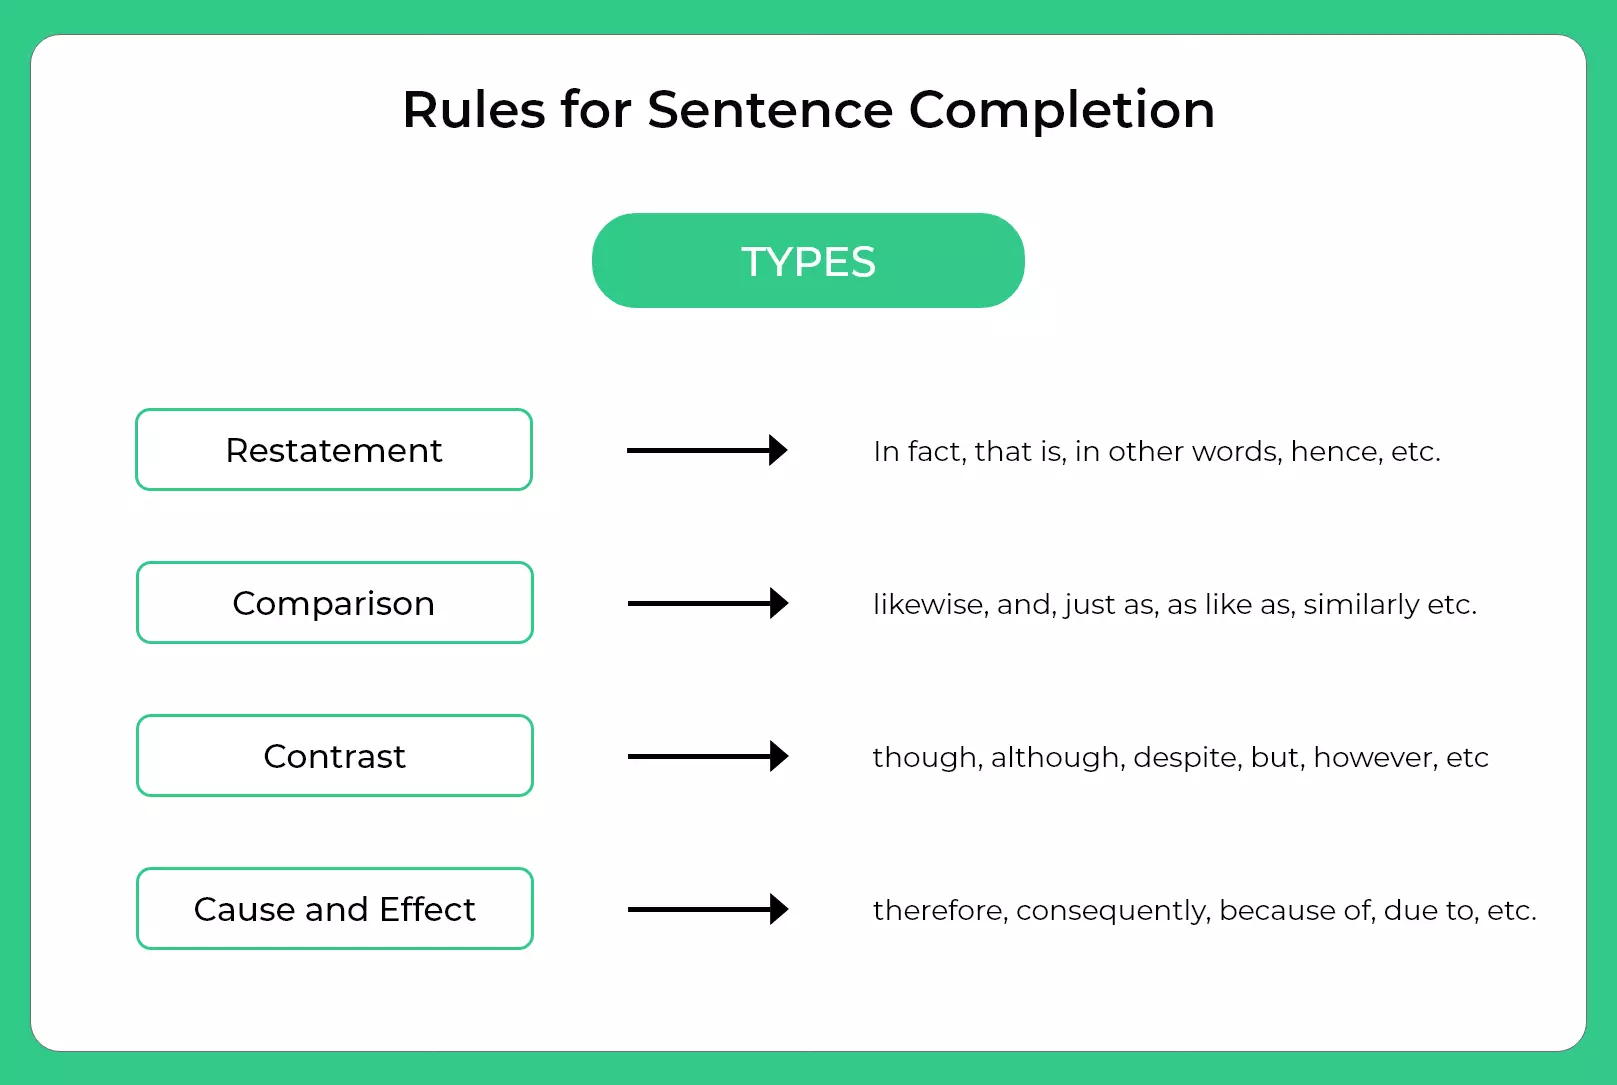 Rules for Sentence Completion